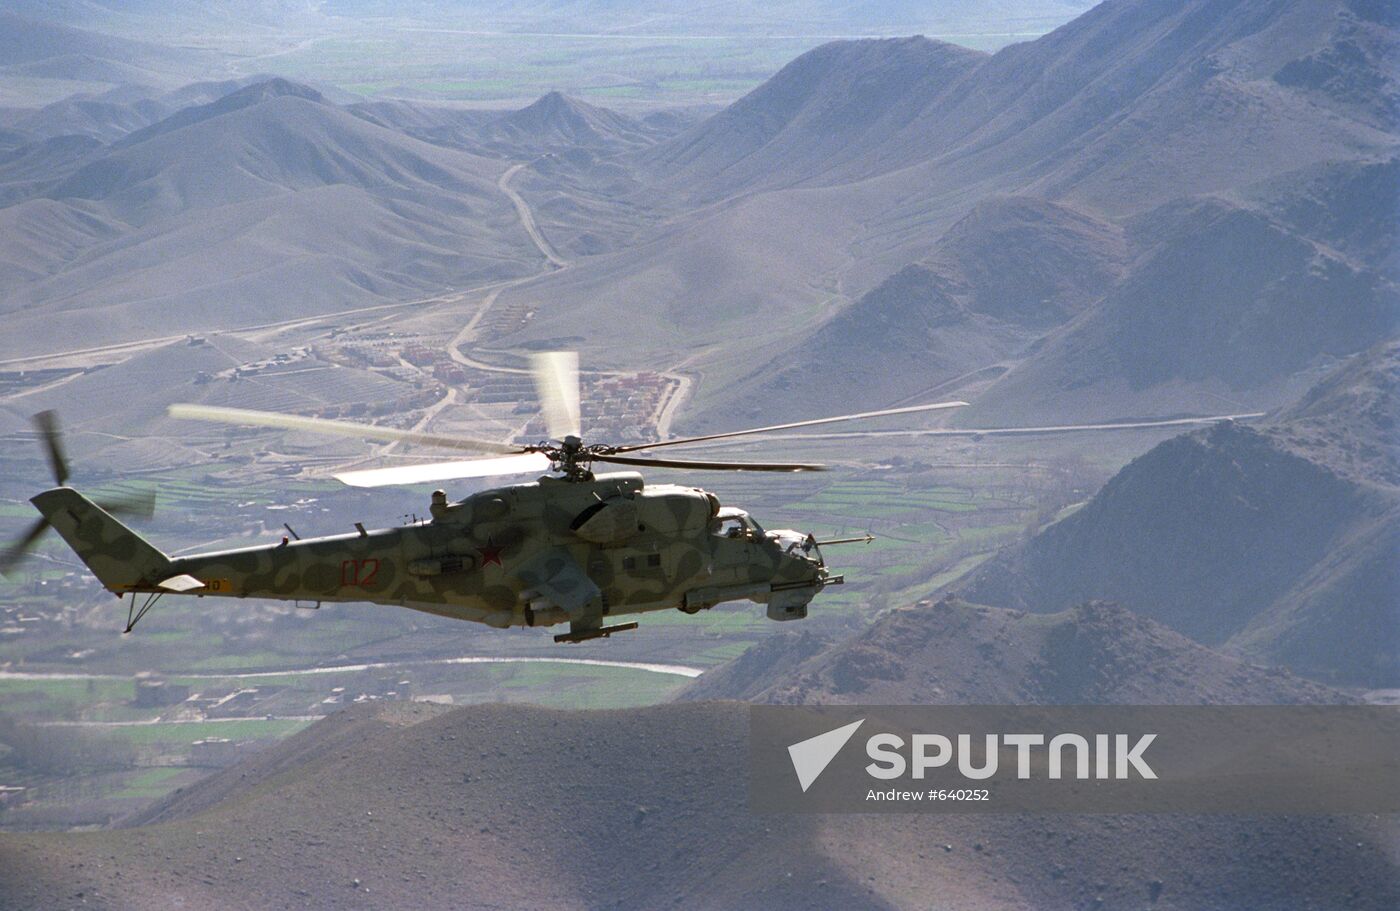 Mi-24 helicopter on mission